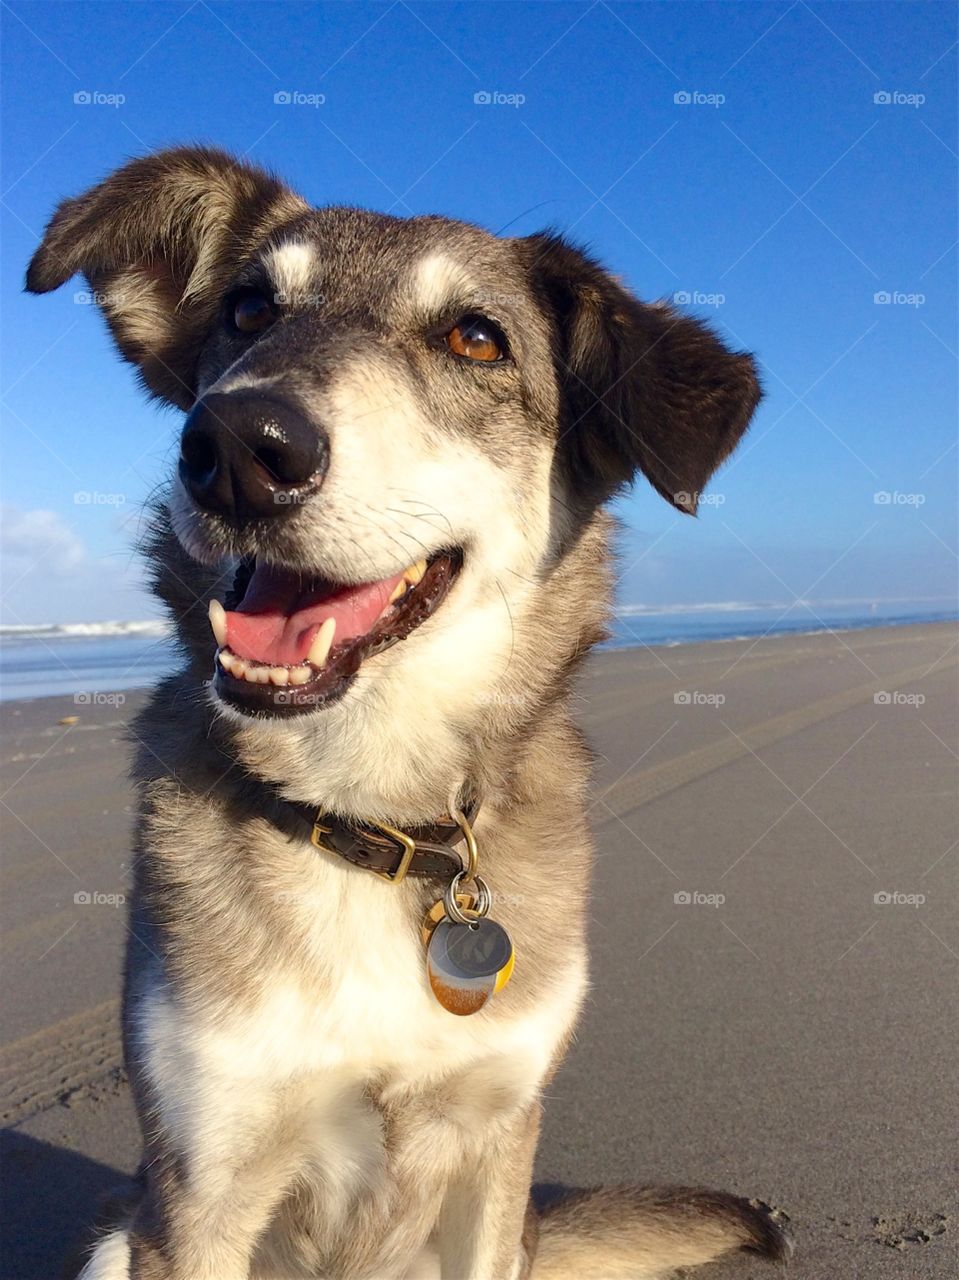 Smiling Dog at the Beach
